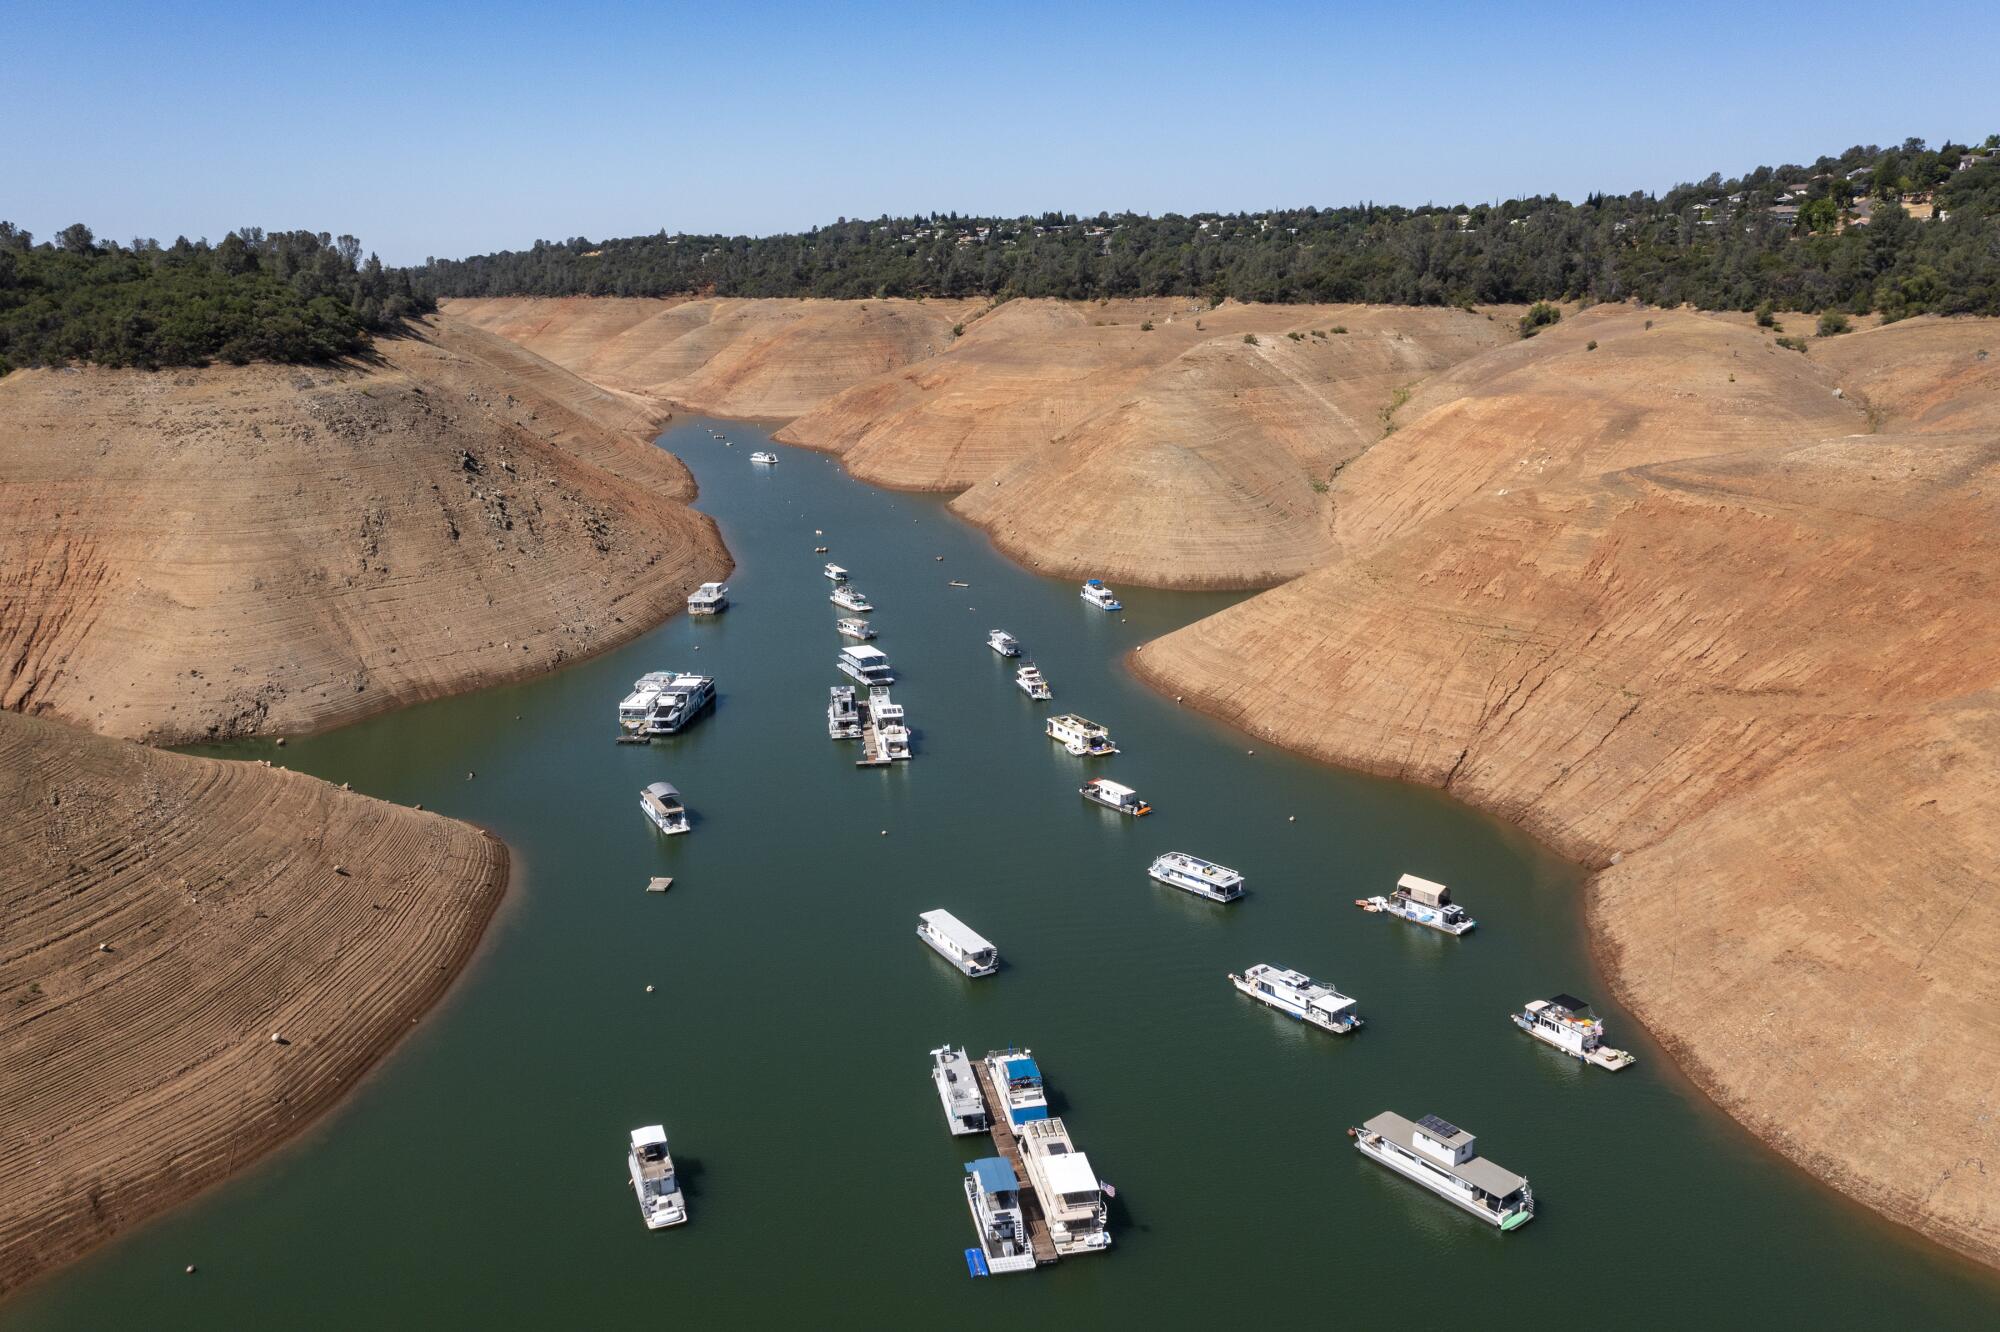 Boats are moored in a shrinking arm of Lake Oroville.